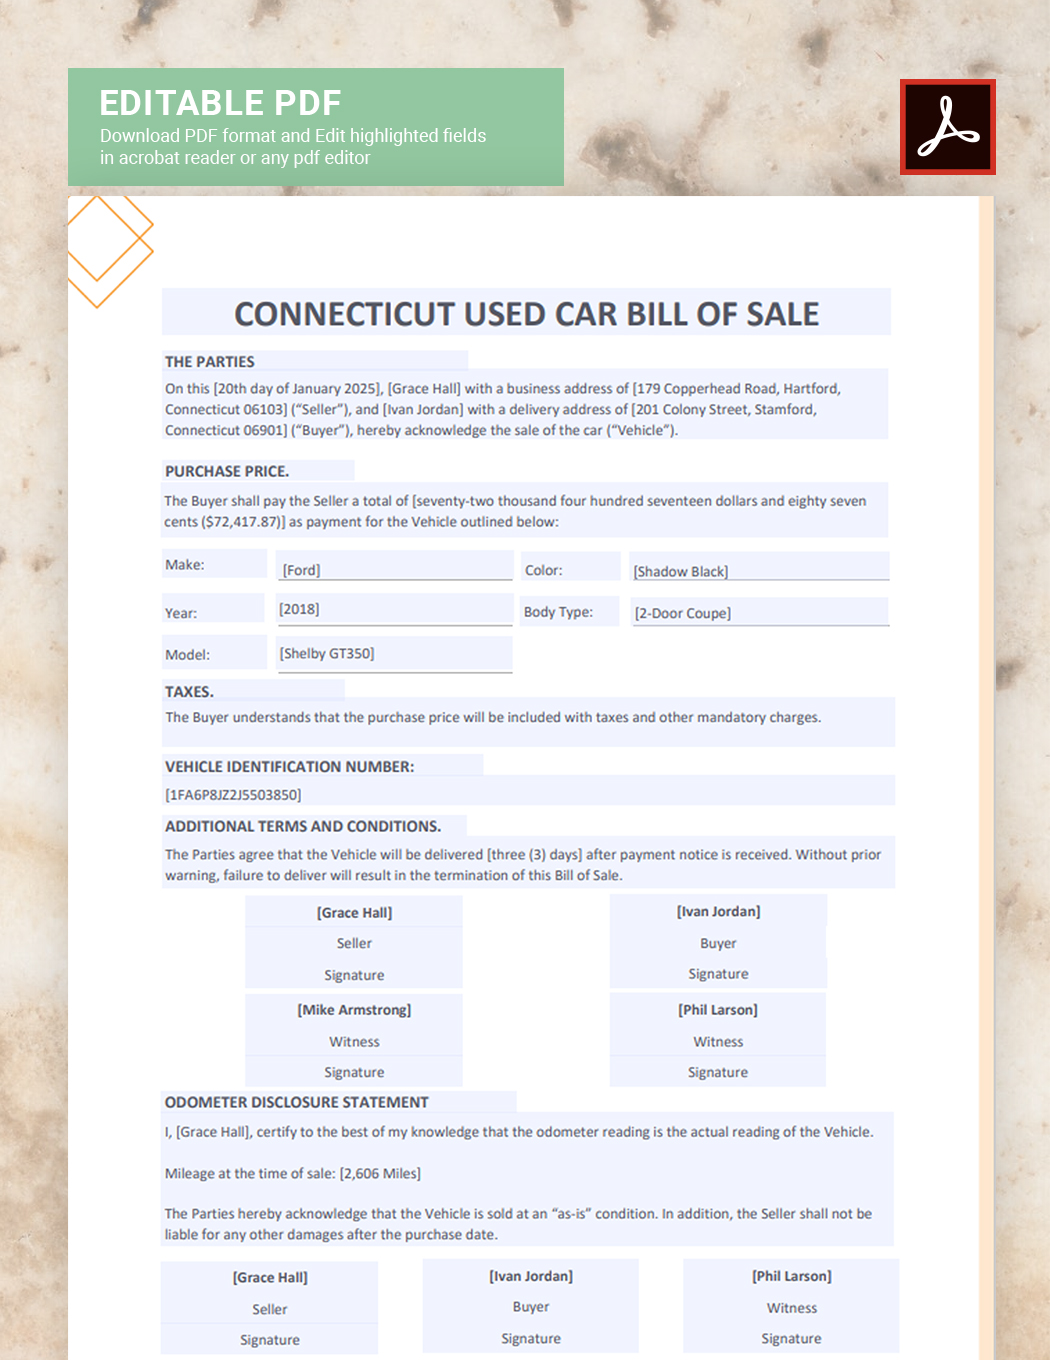 Connecticut Used Car Bill of Sale Template